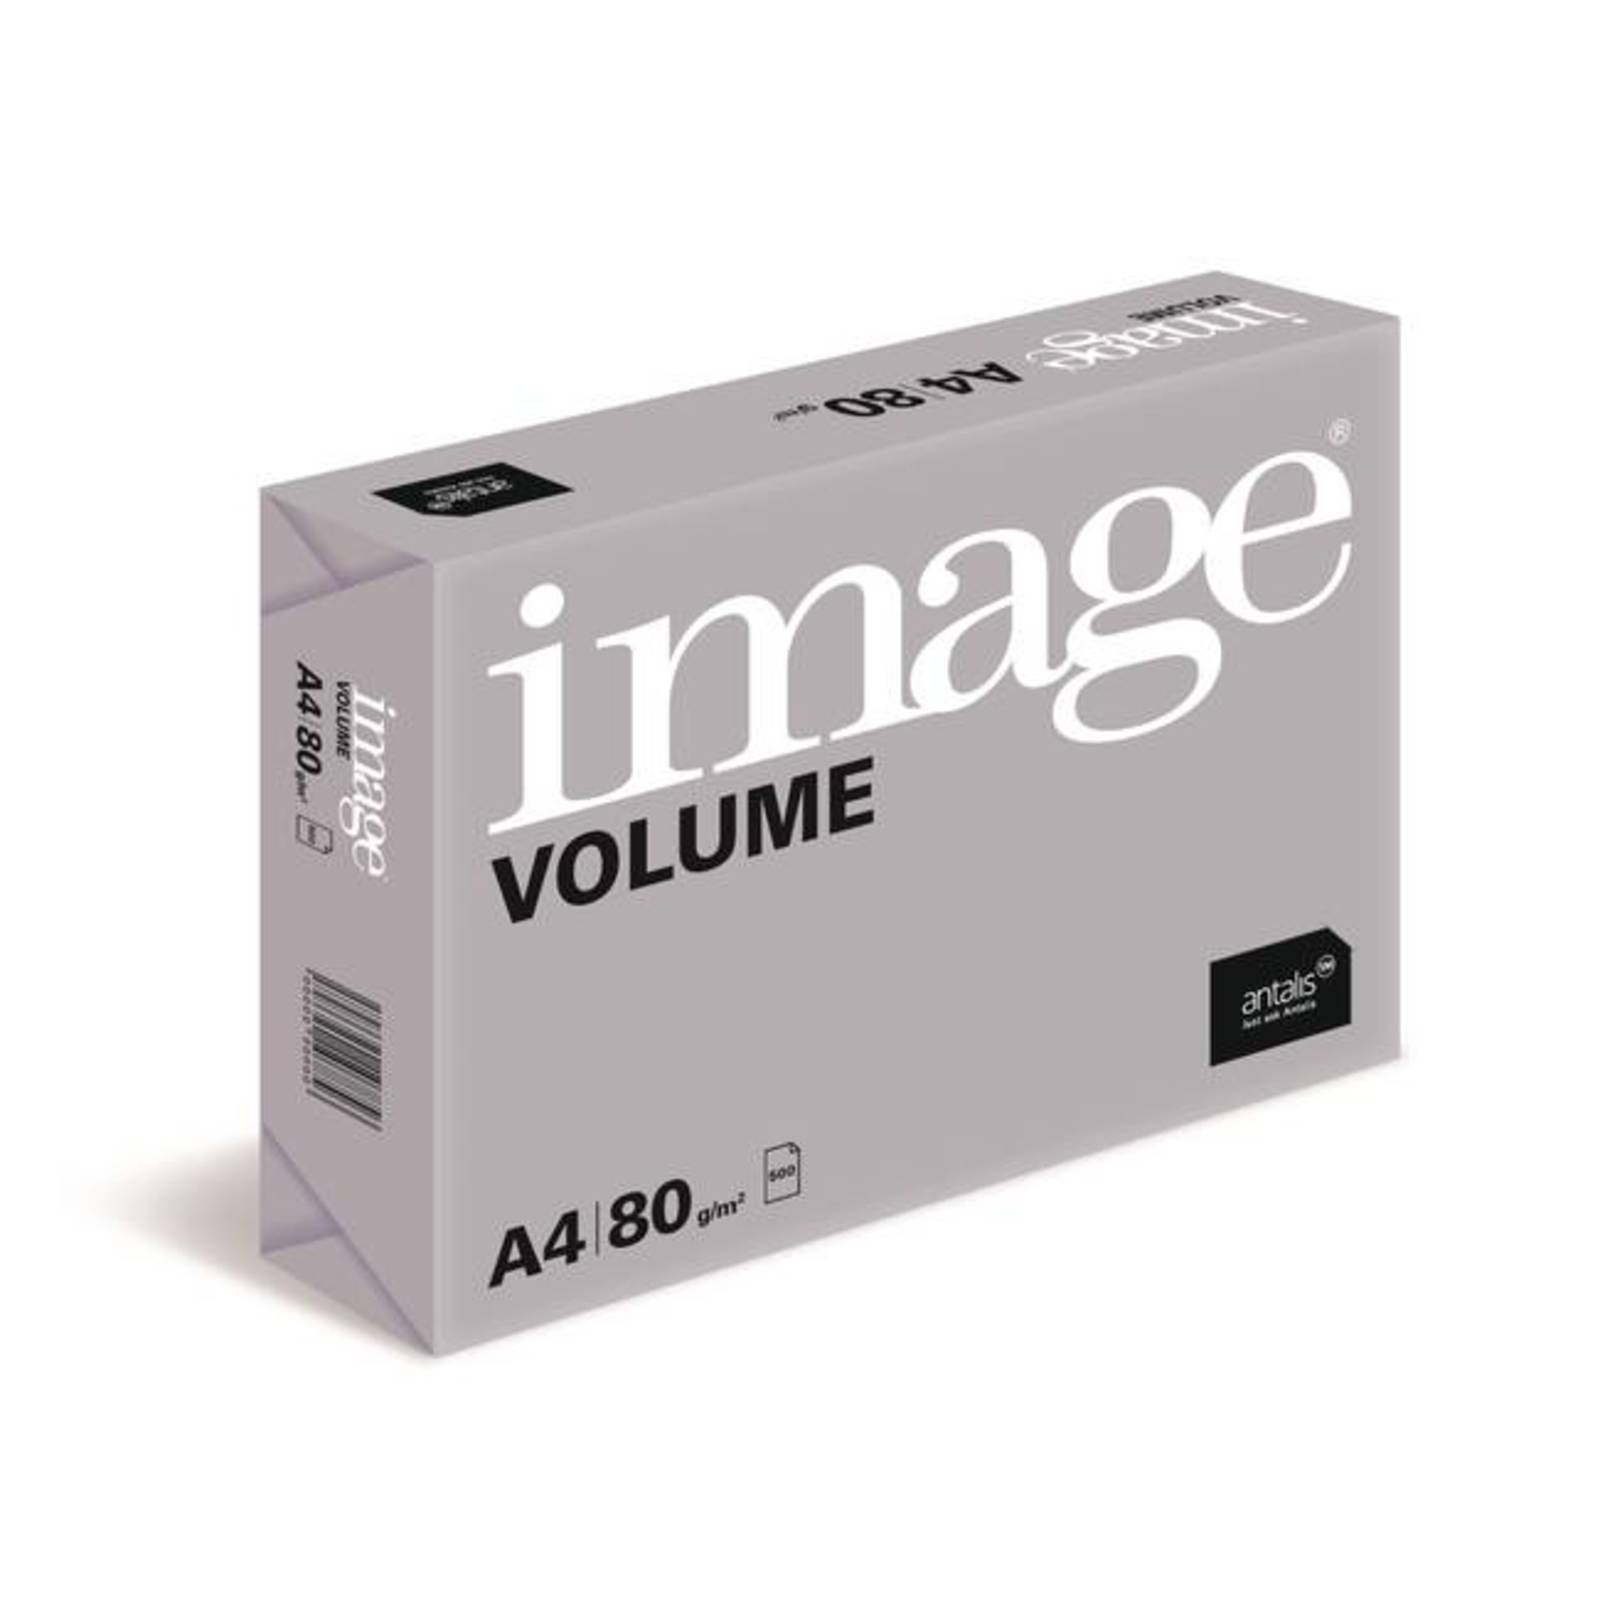 IMAGE COPIER PAPER A4 80gsm WHITE (500) - MULTI BUY DISCOUNT AVAILABLE!!